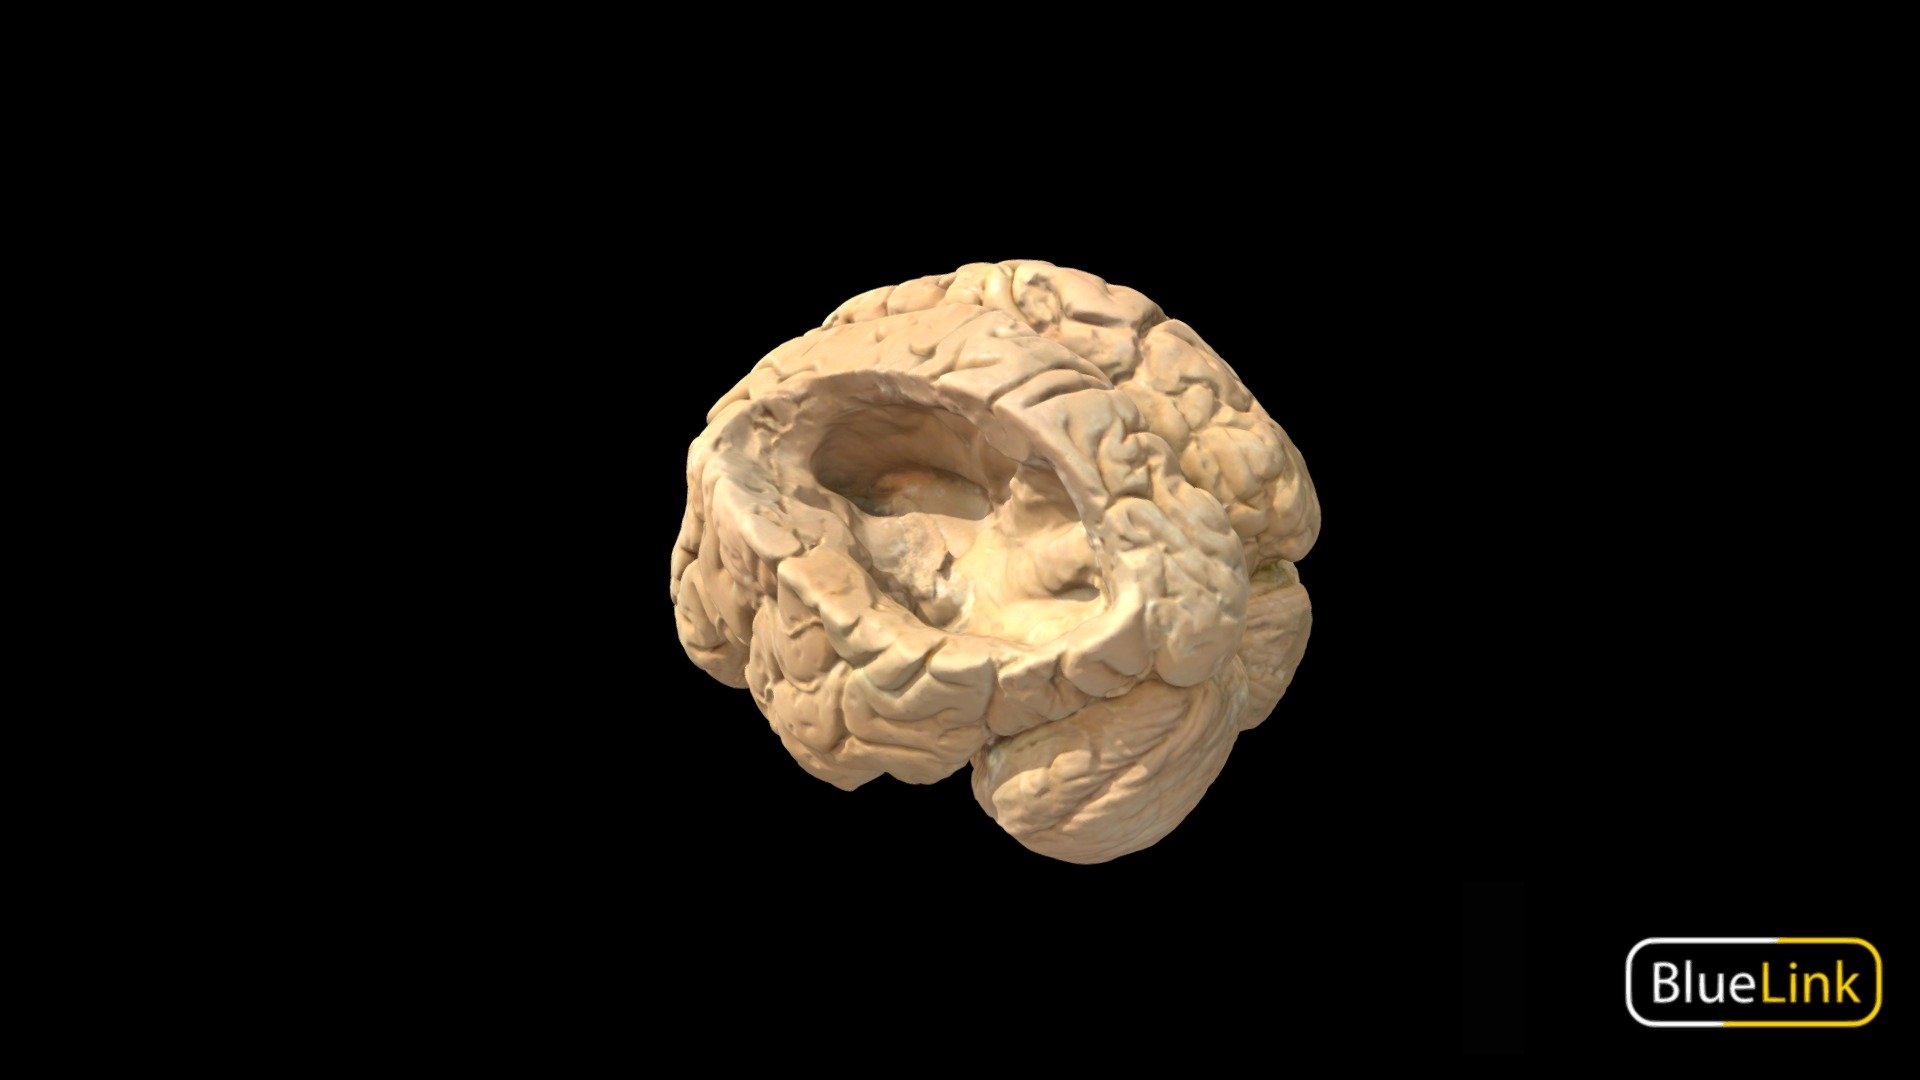 3D scan of the brain with section cut out to display the hippocampus

Captured with Einscan Pro

Captured and edited by: Madelyn Murphy, Cristina Prall

Copyright2019 BK Alsup &amp; GM Fox - Brain - Lateral Ventricle, Labeled - 3D model by Bluelink Anatomy - University of Michigan (@bluelinkanatomy) 3d model